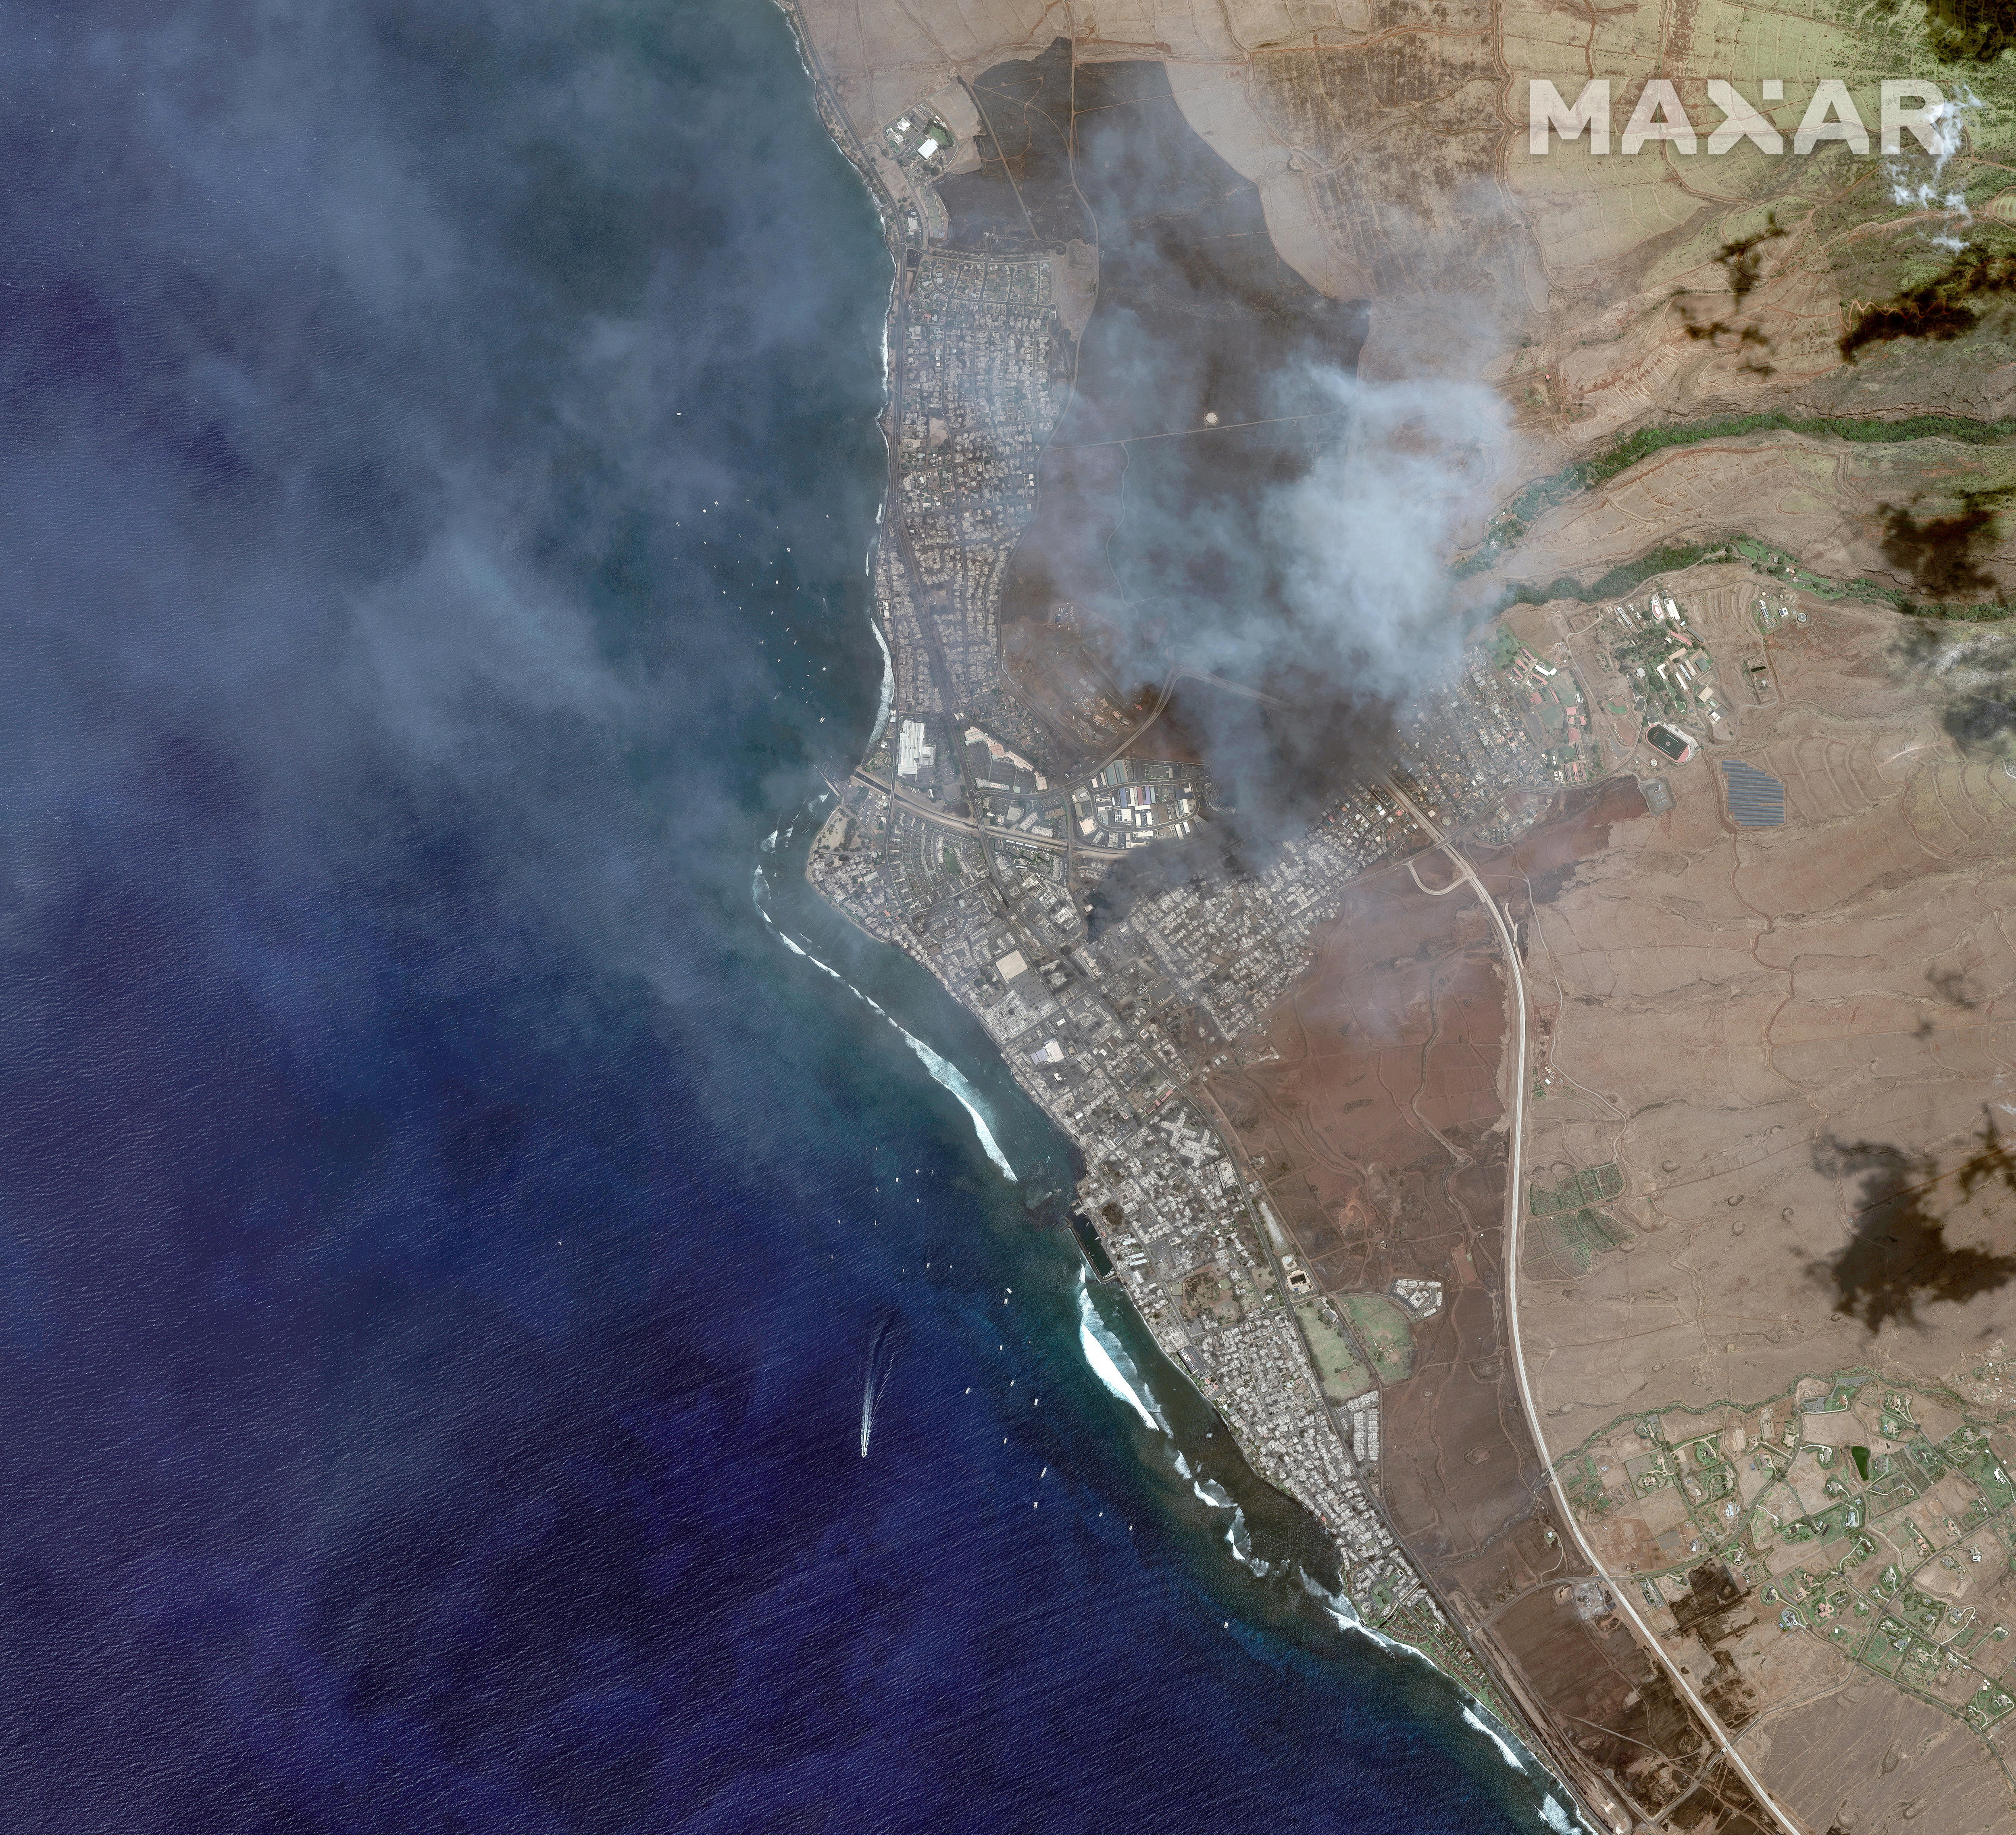 Images taken on June 25 and August 9 of the same area following a wildfire that tore through the area. (Maxar Technologies)